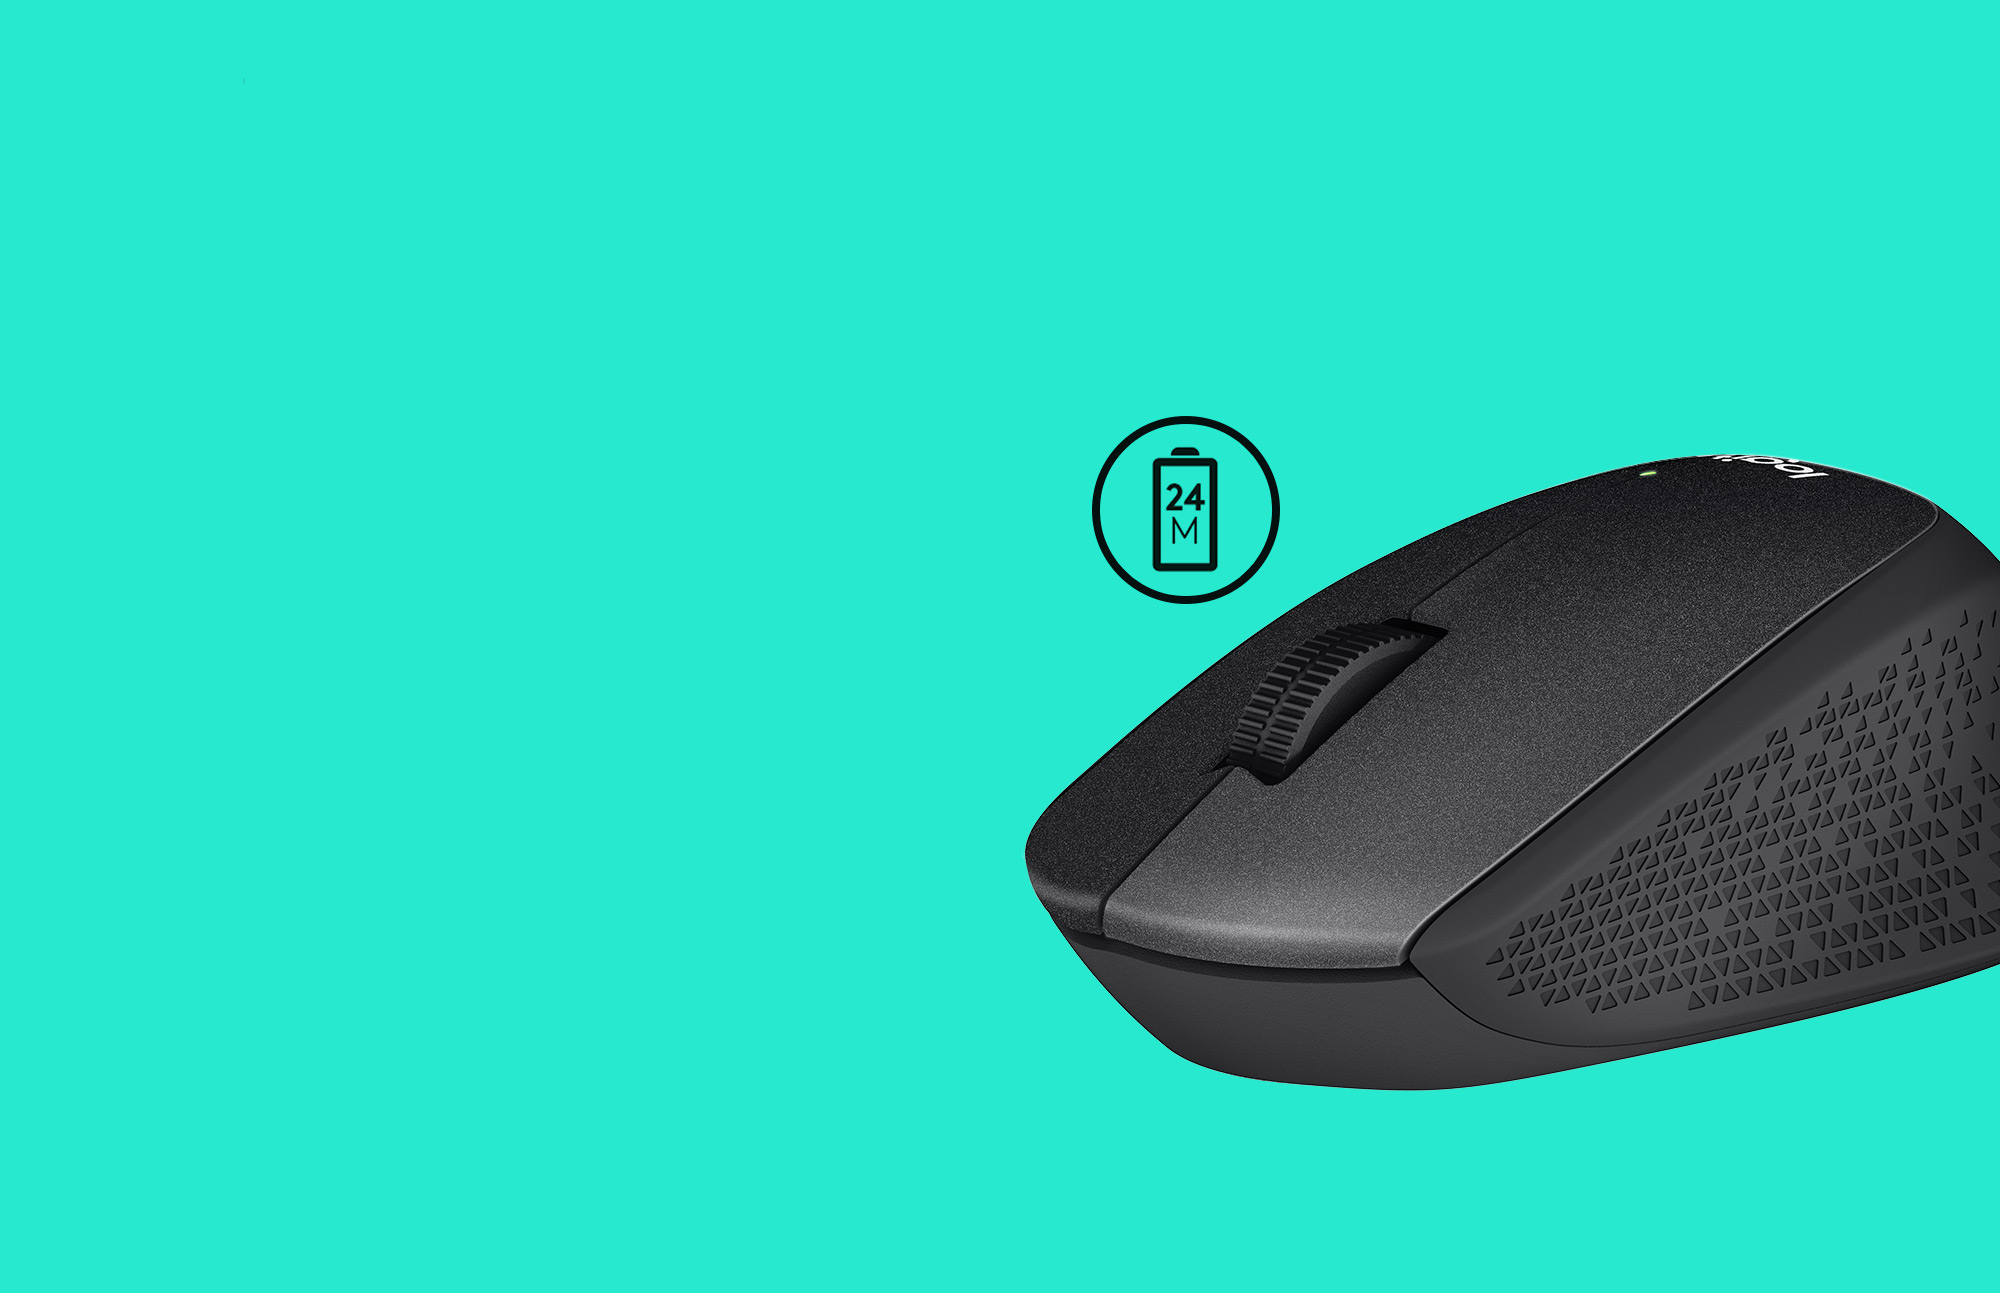 Logitech m331 mouse with teal background